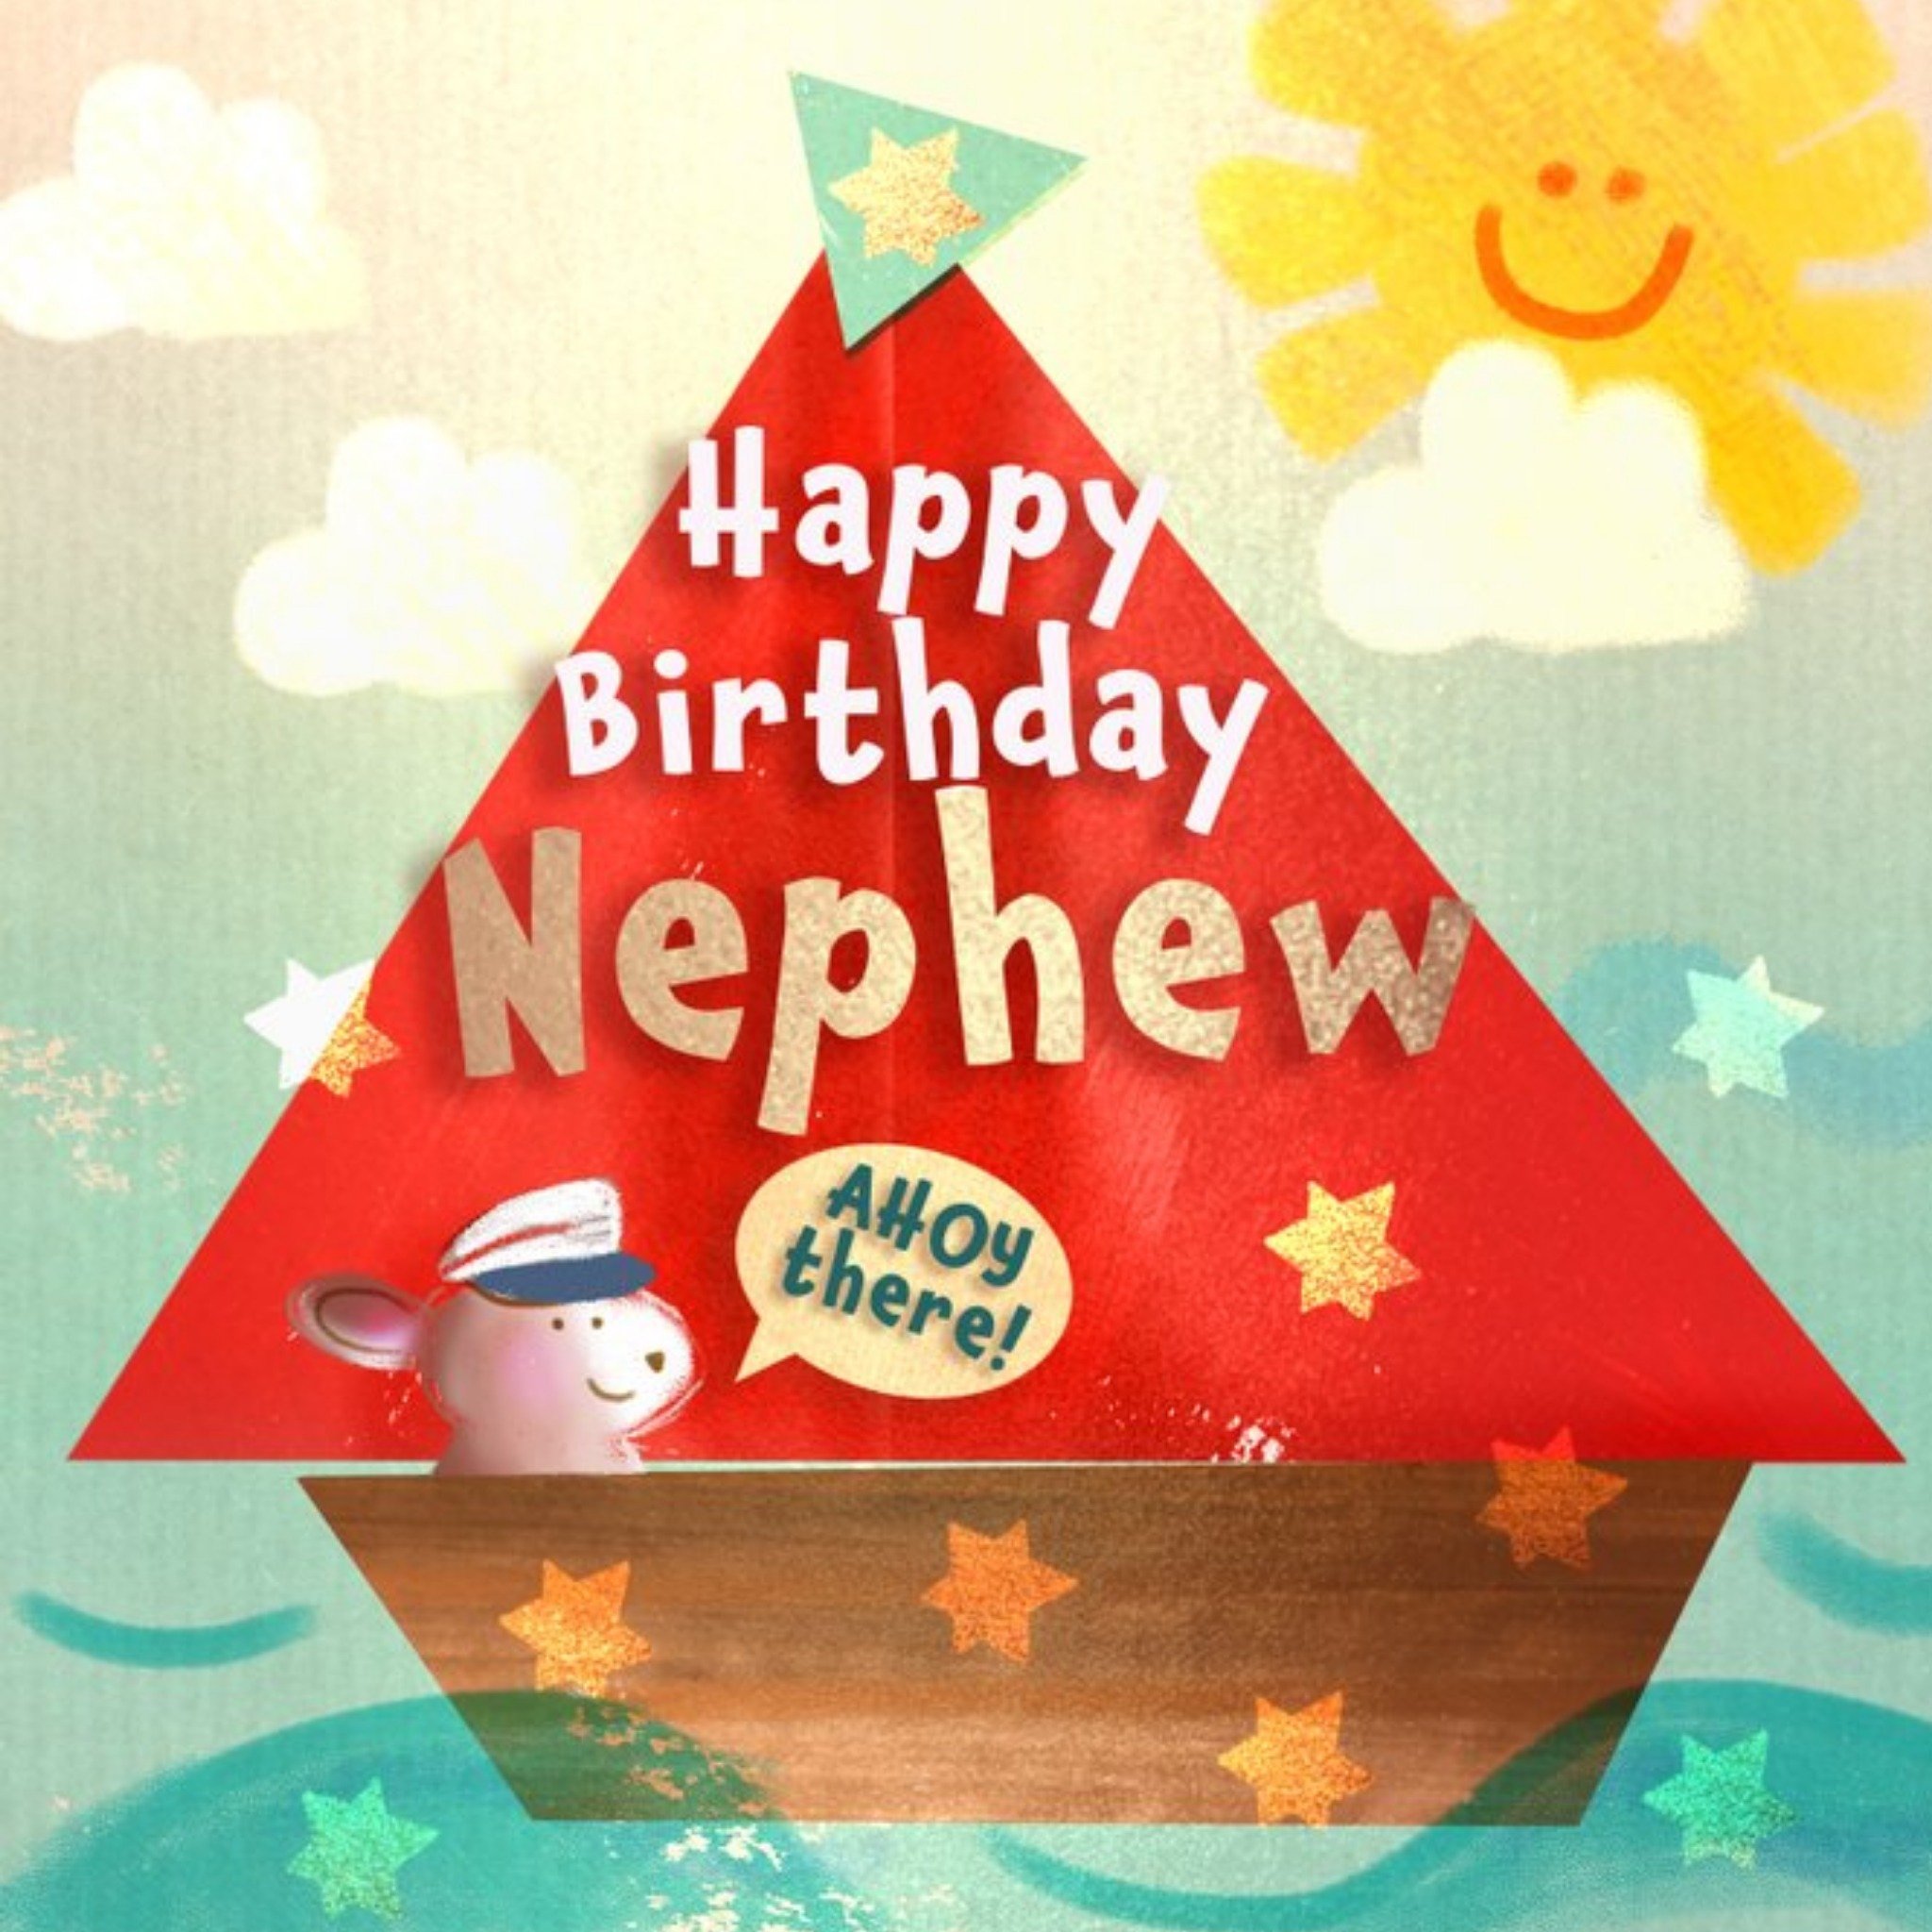 Mickey Mouse Mouse In Boat Happy Birthday Nephew Card, Large